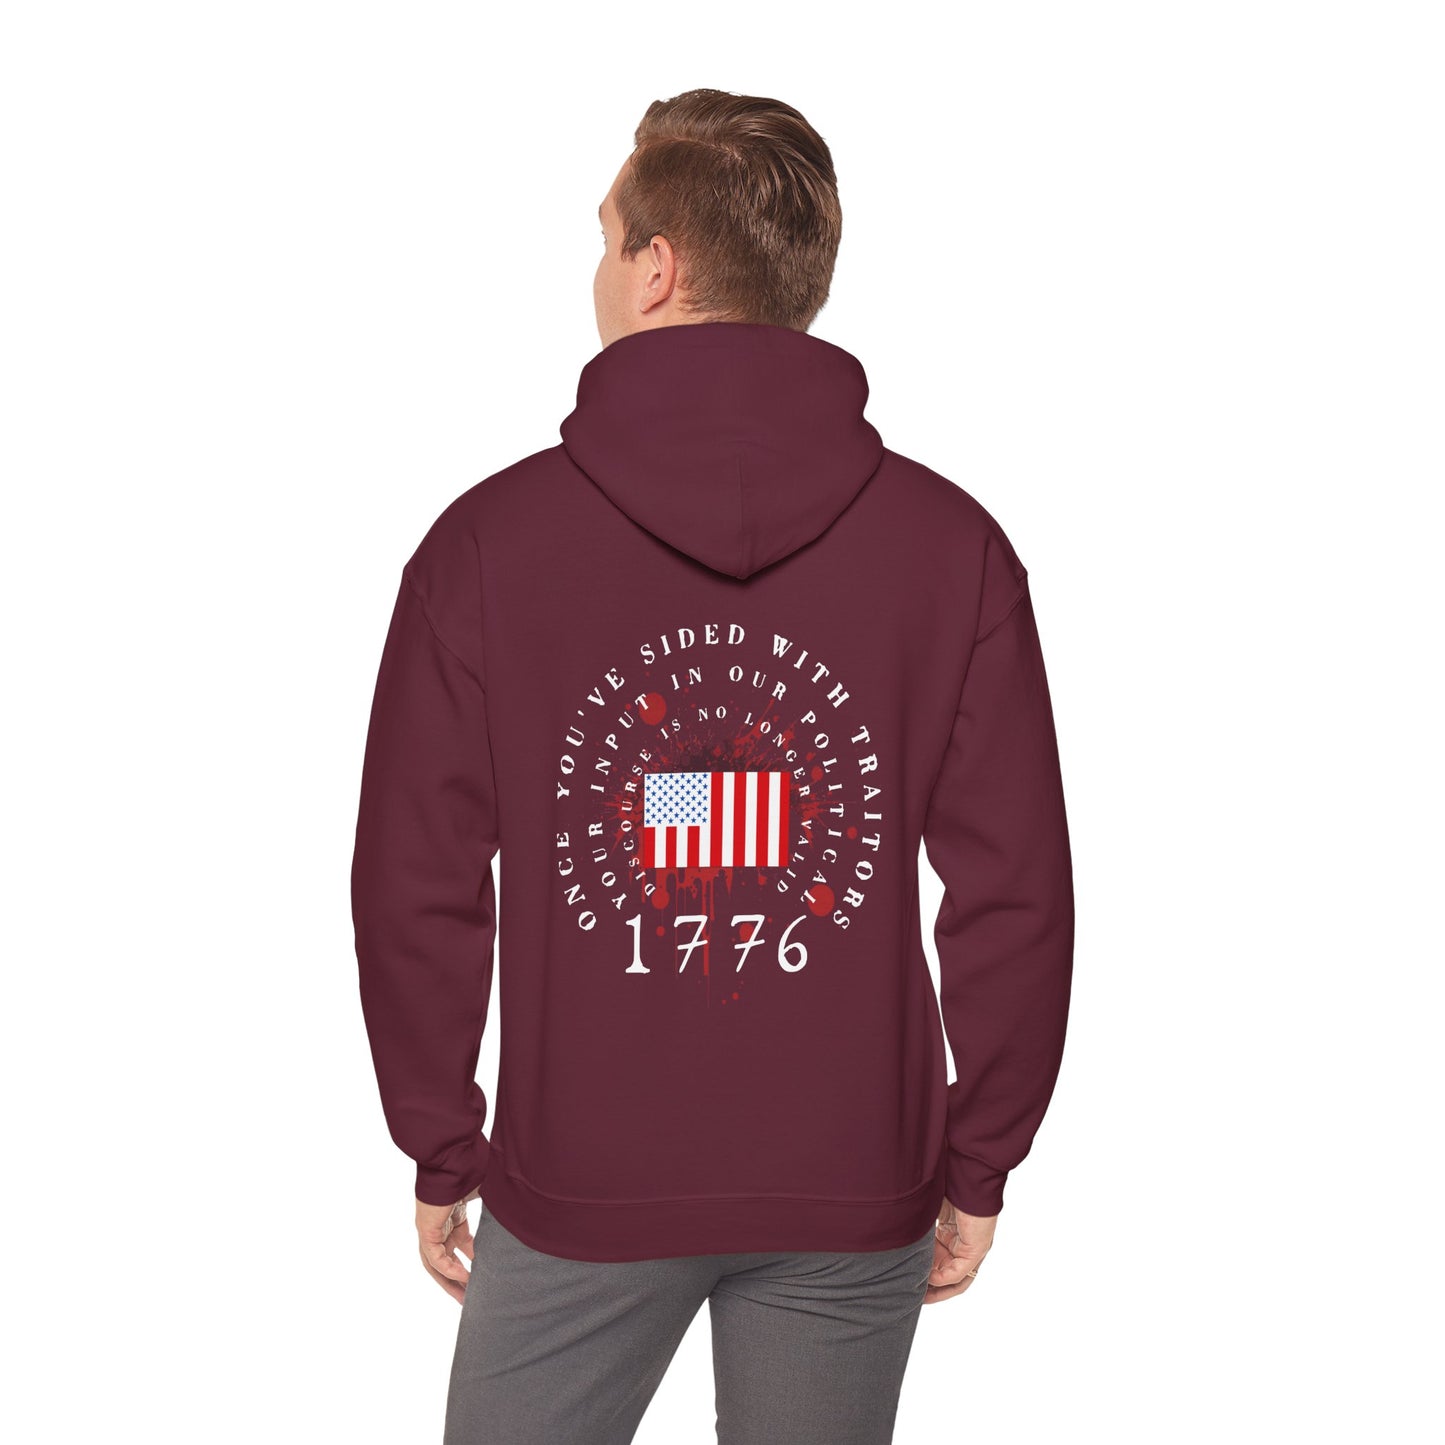 Straight Events Once You've Sided With Traitors - Flag Hoodie